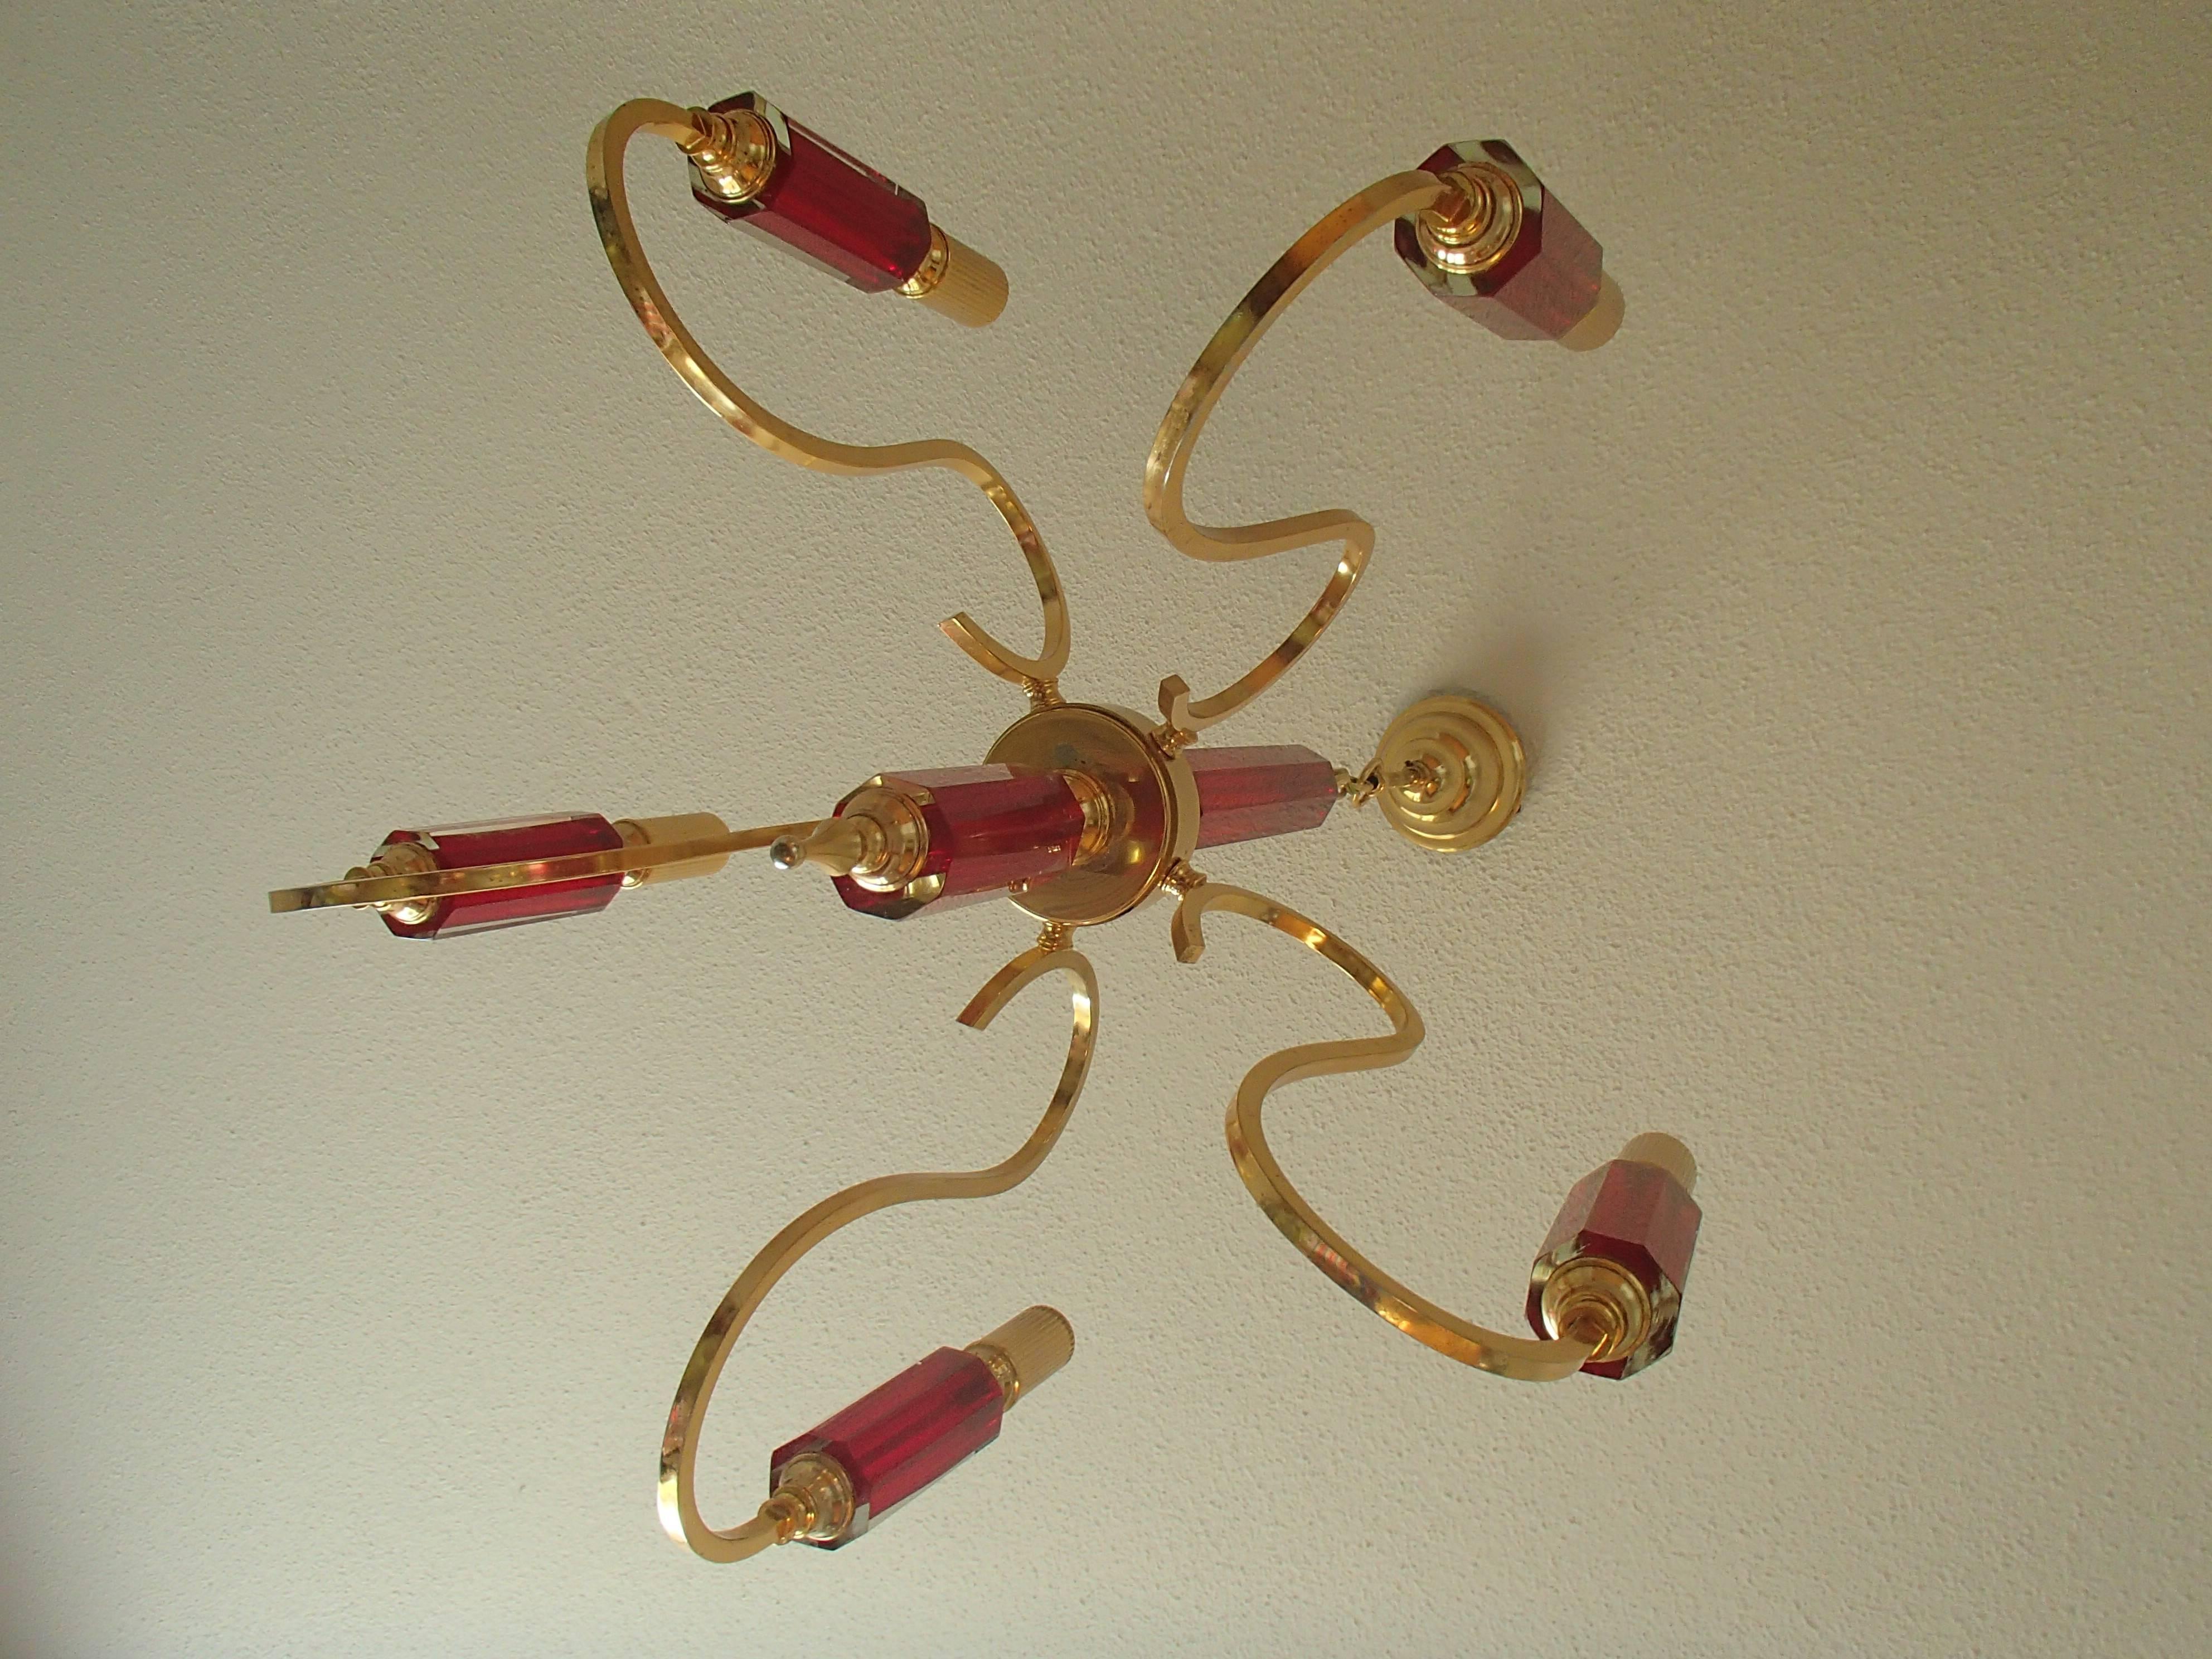 Molded Midcentury Five Arms Chandelier Vibrant Red Bohemian Glass and Brass-Plated For Sale